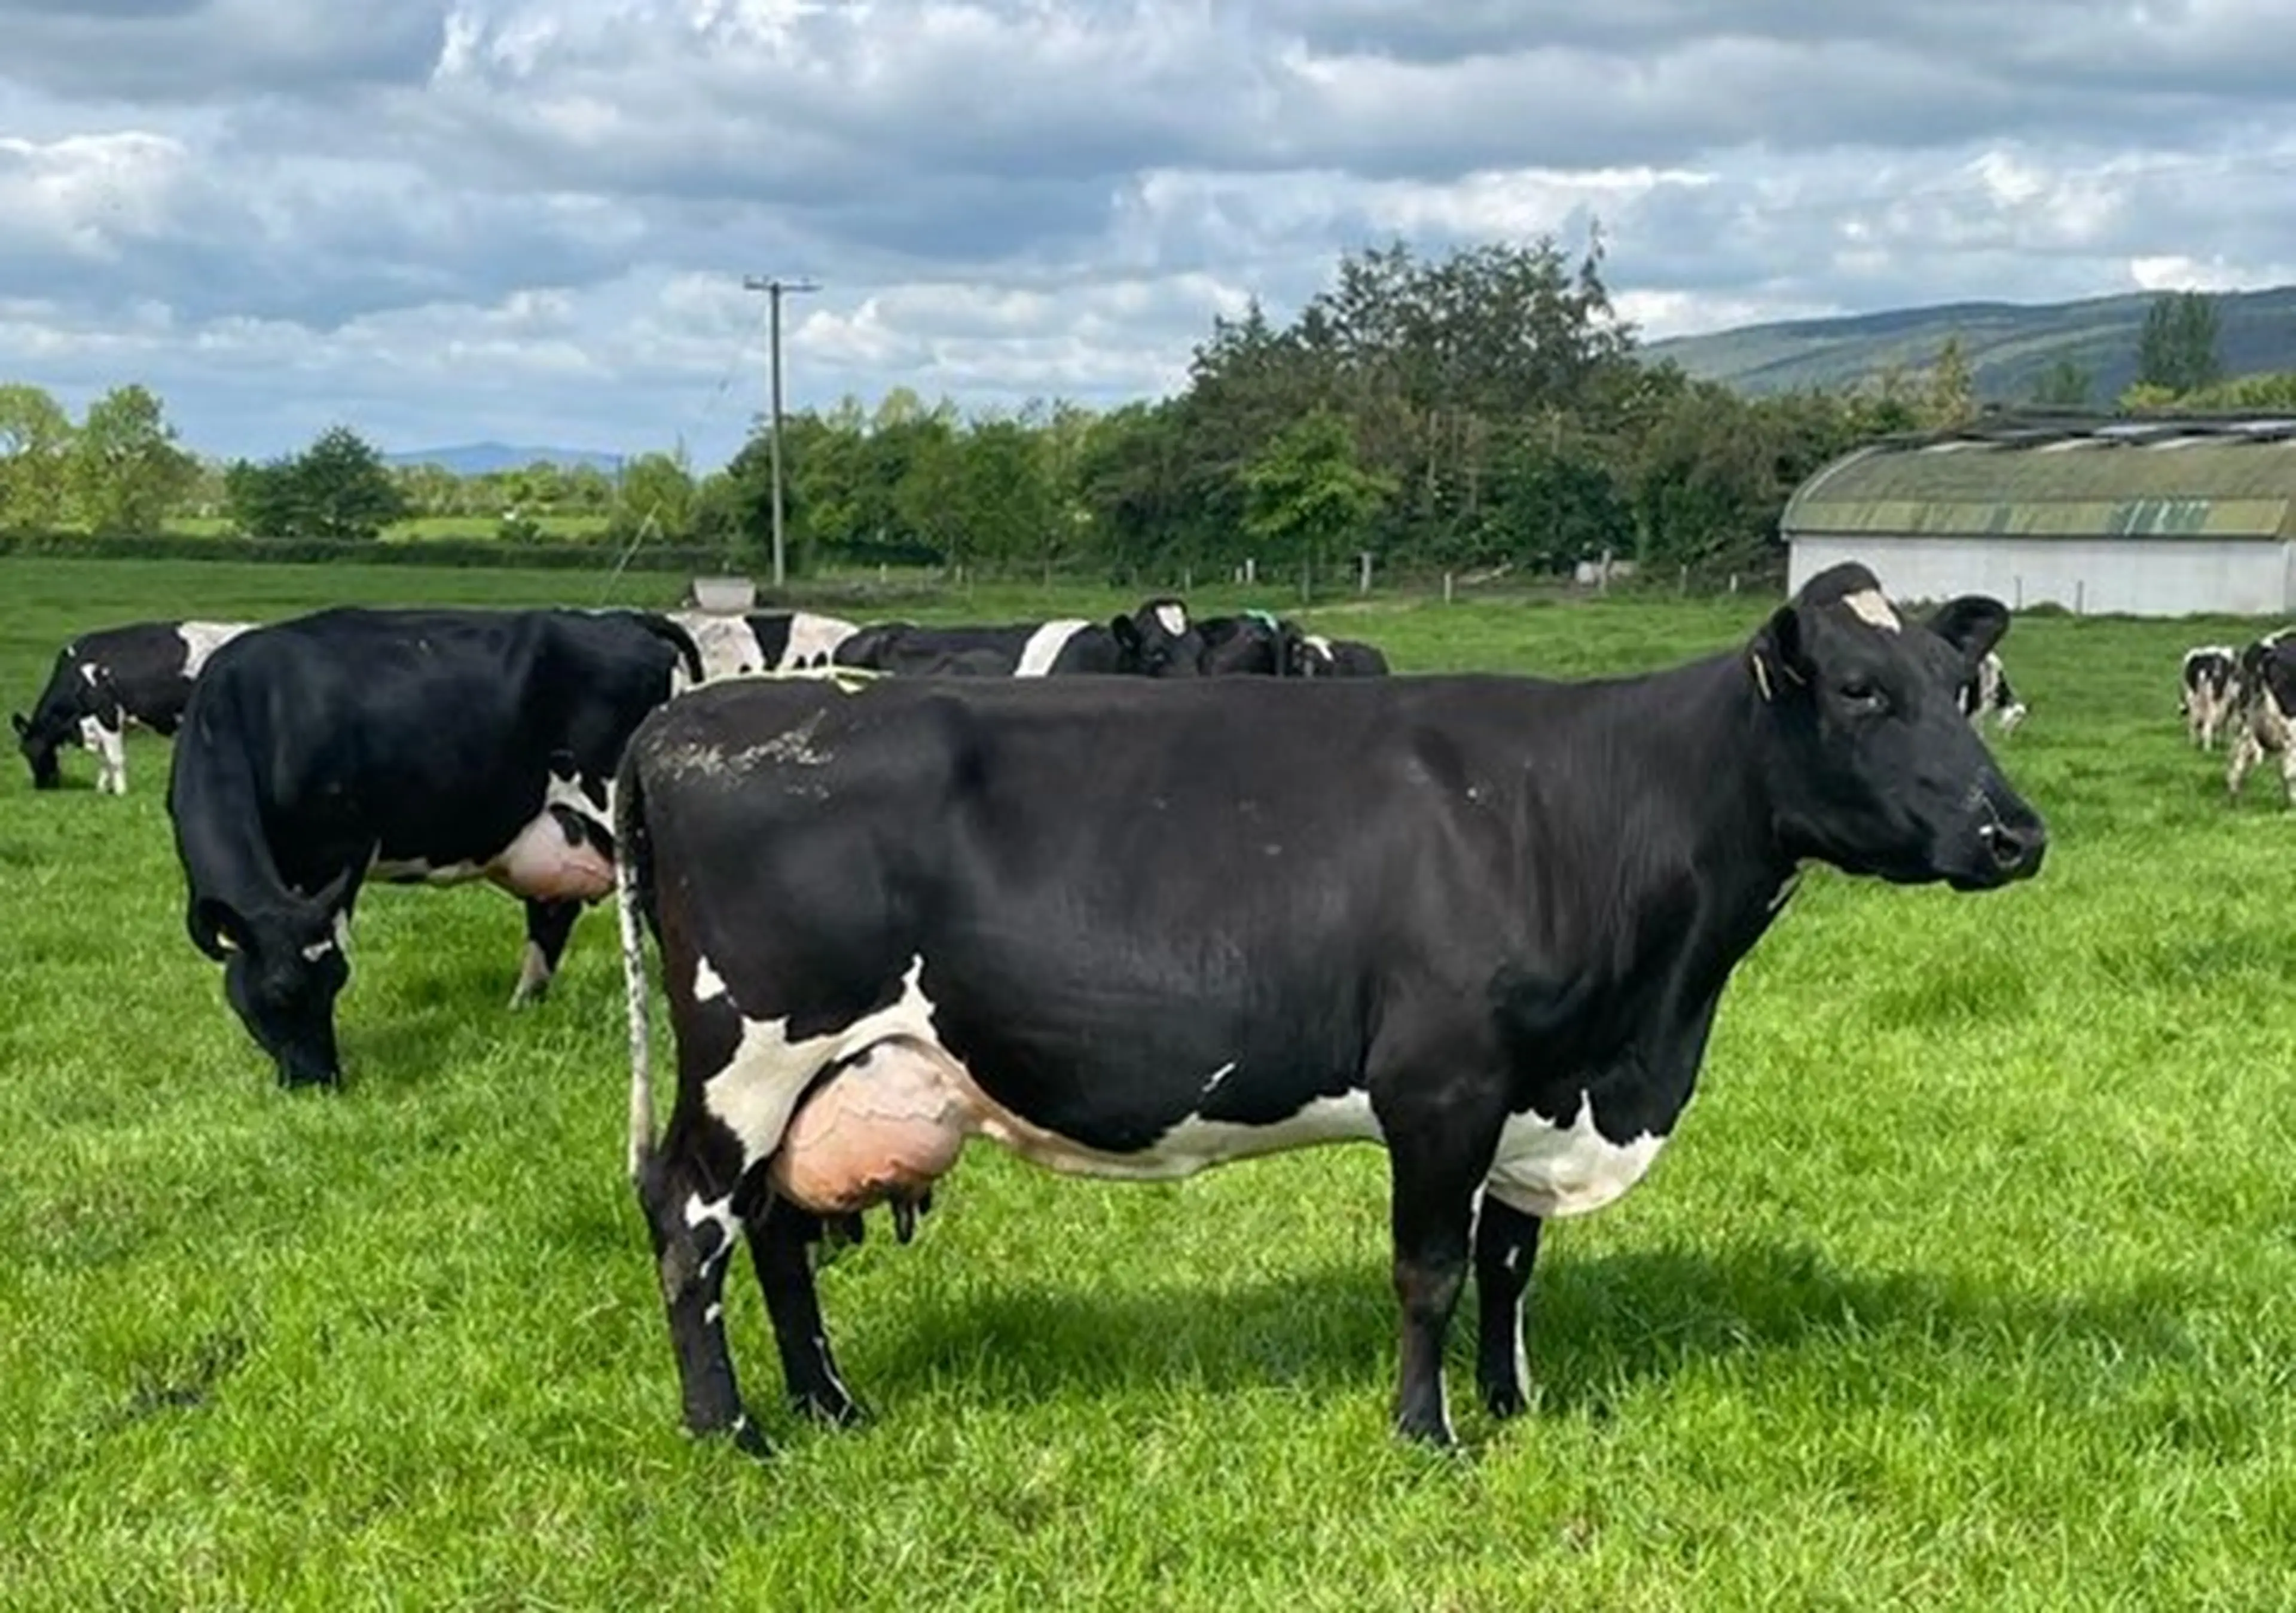 Figure 5 HO X NR, EIK daughter. A two way cross with the Norwegian Red provides durability with improvements to claw health & mastitis resistance.